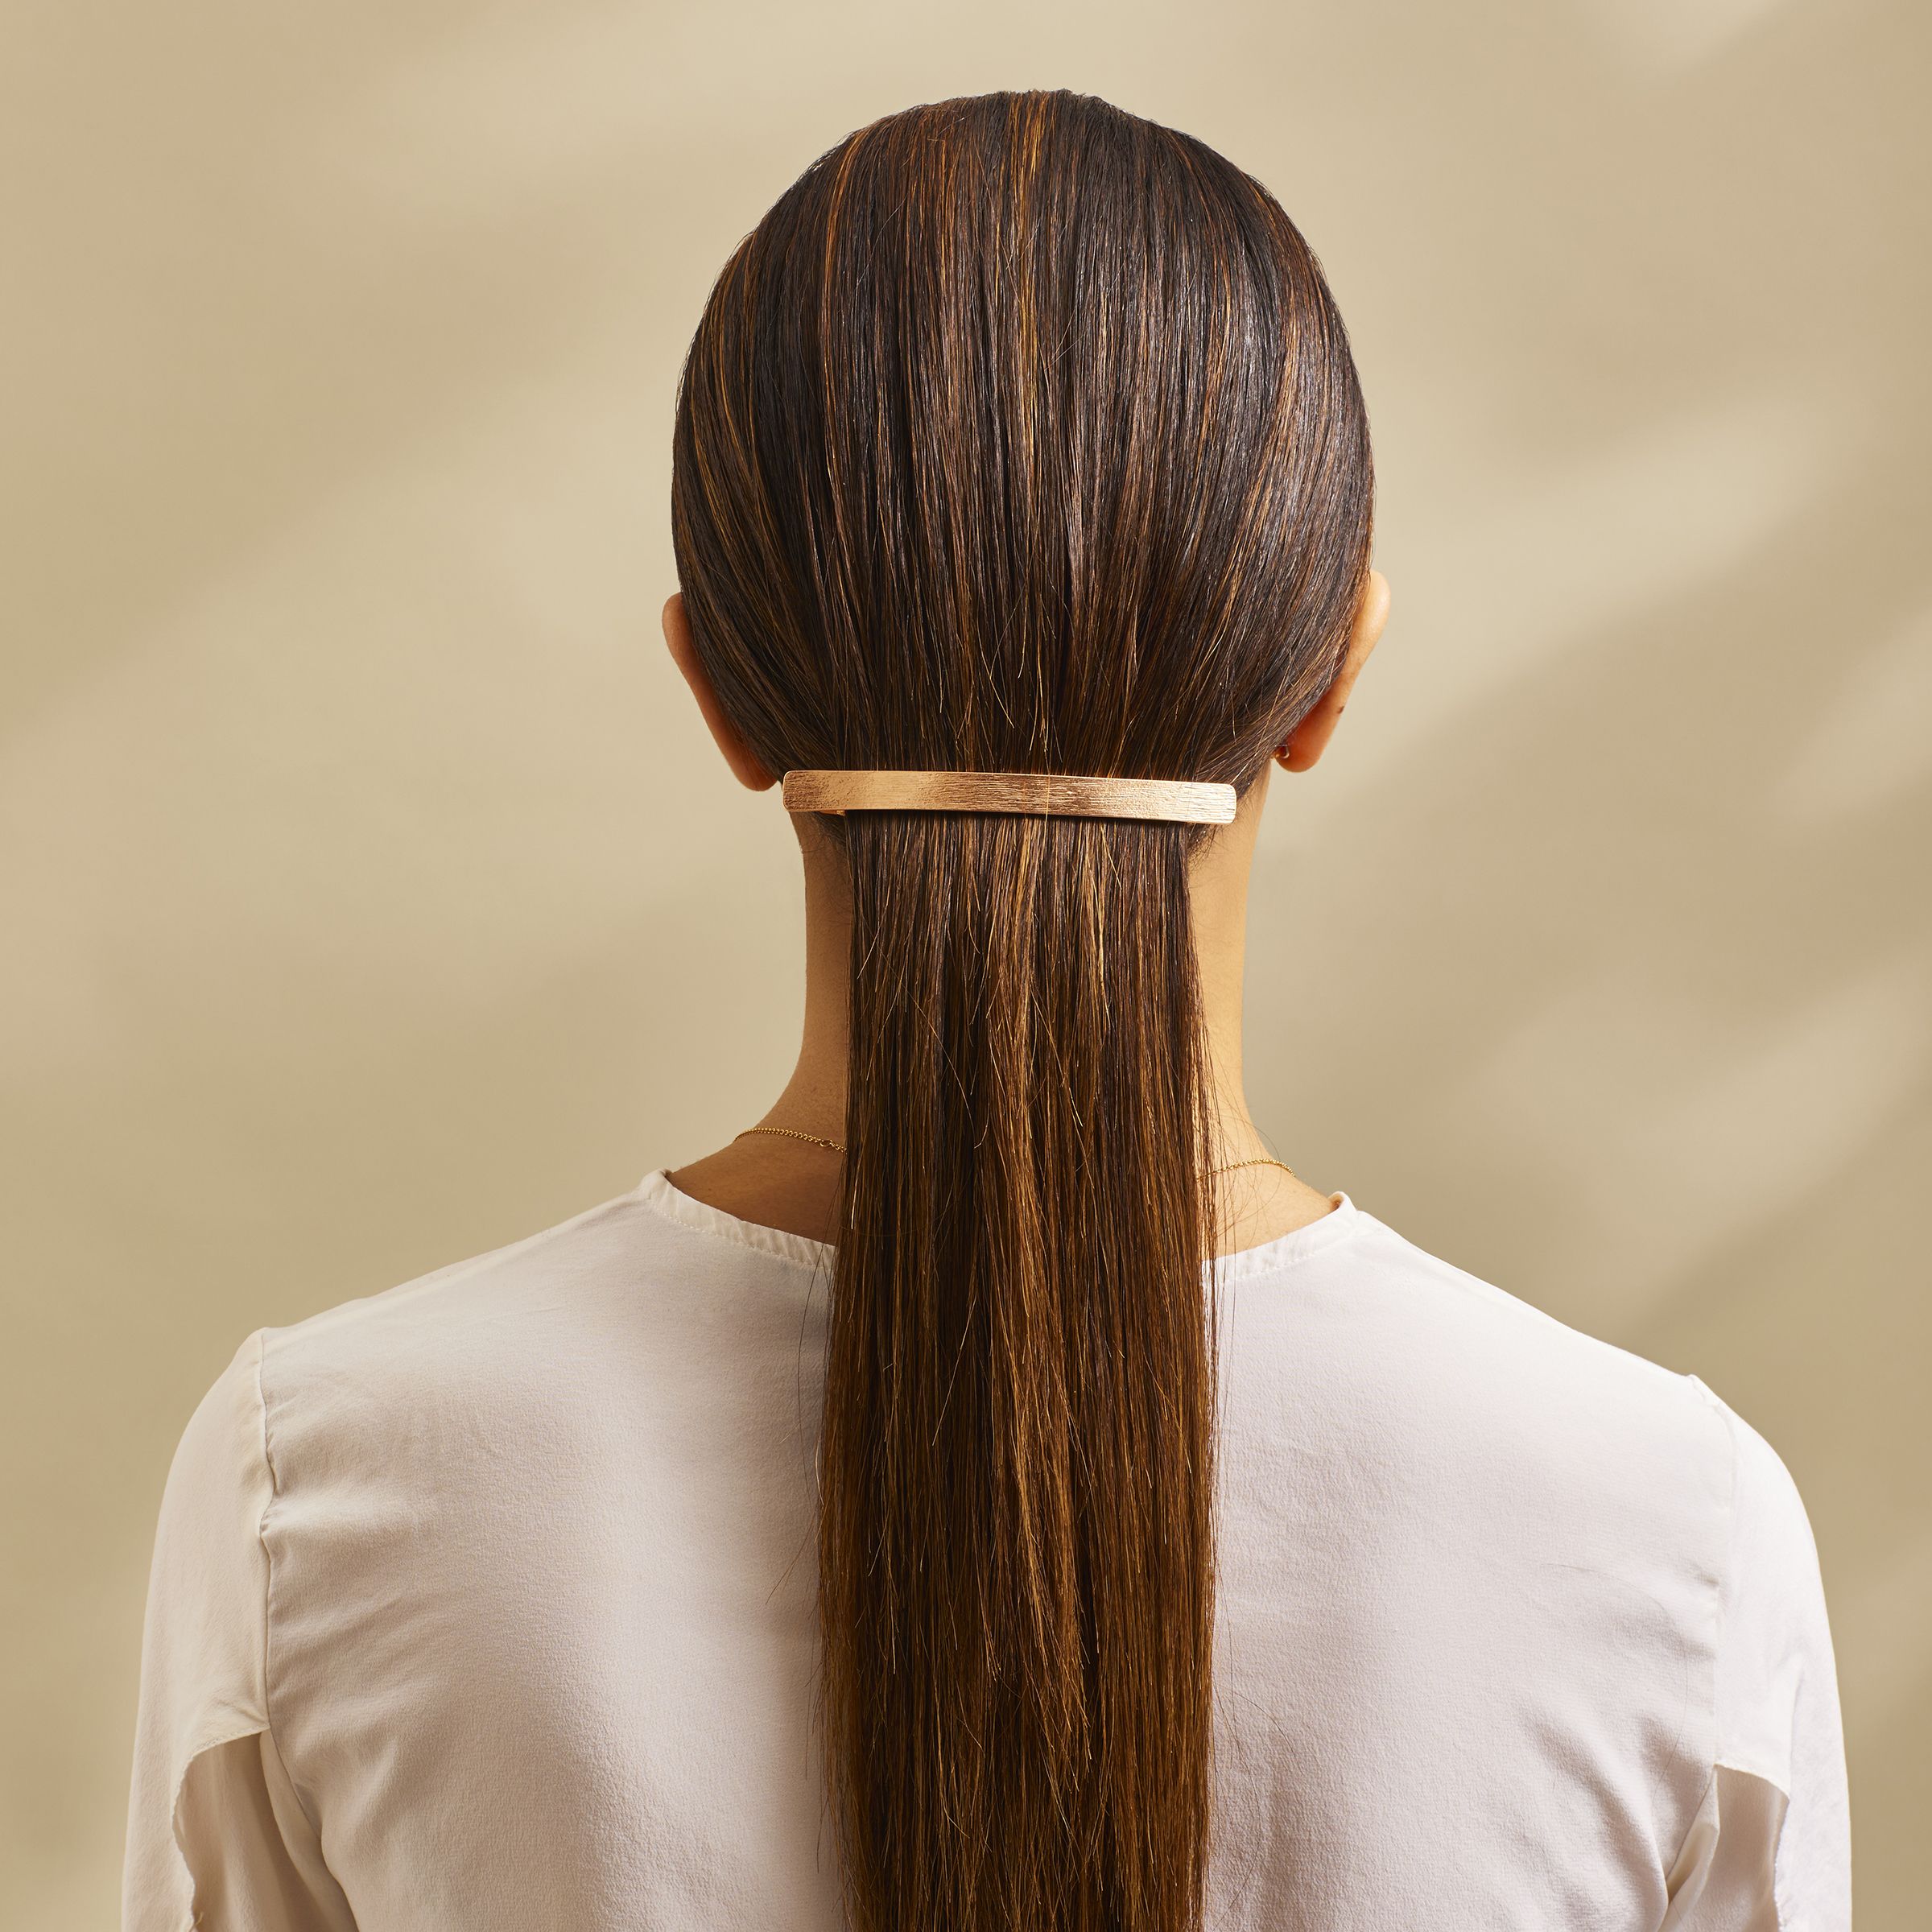 No-Heat Hairstyles for Minimal Damage |